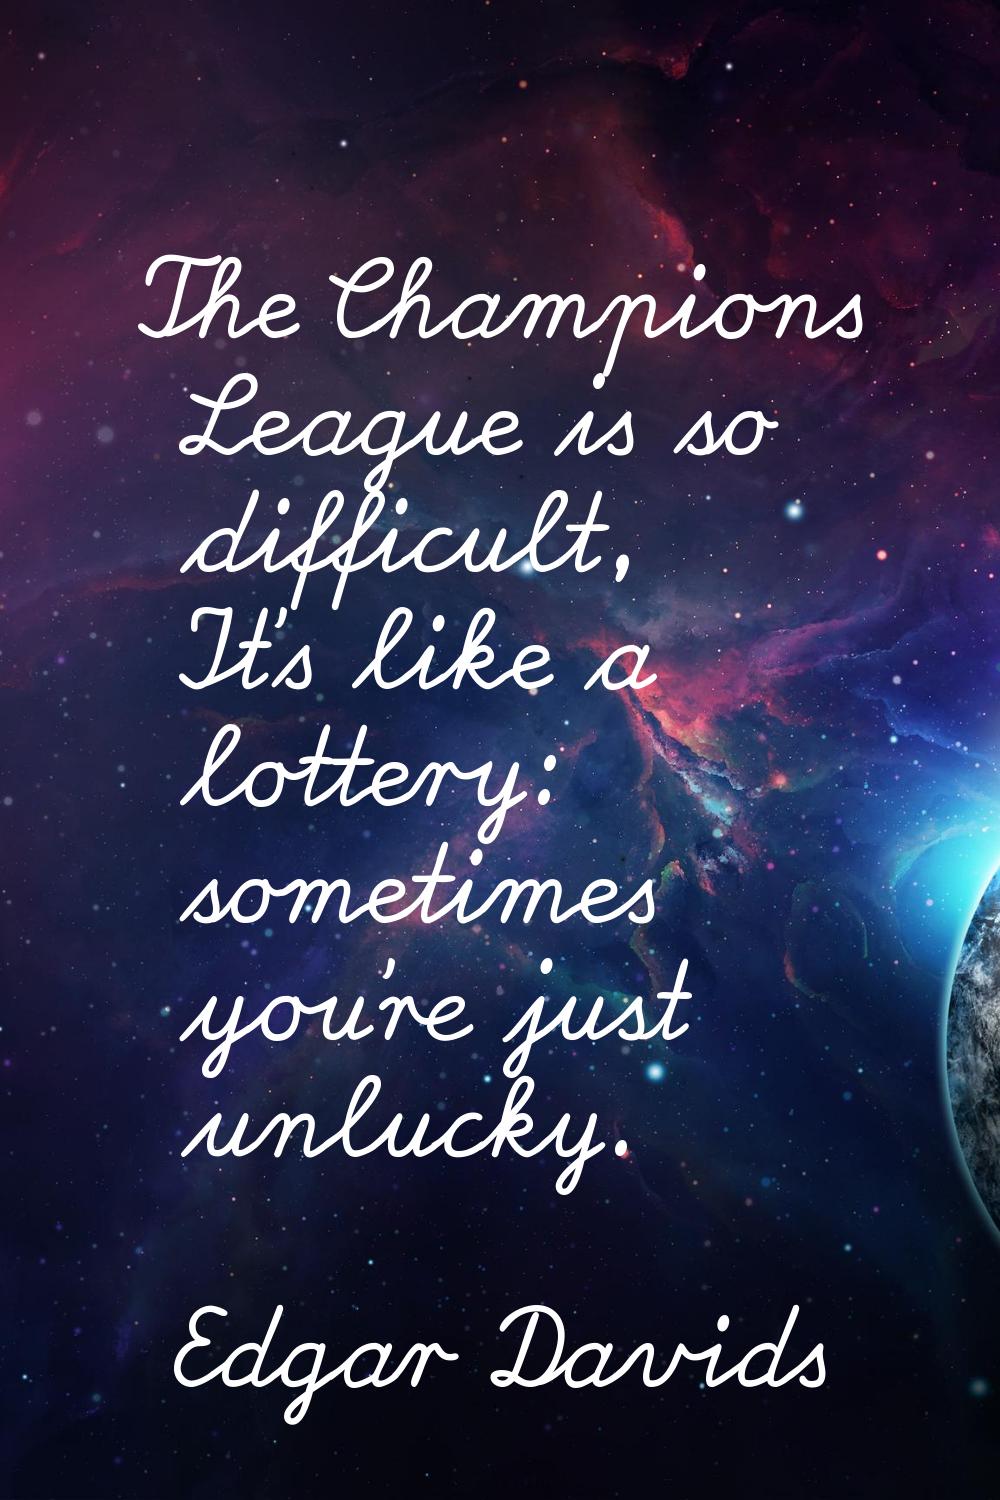 The Champions League is so difficult, It's like a lottery: sometimes you're just unlucky.